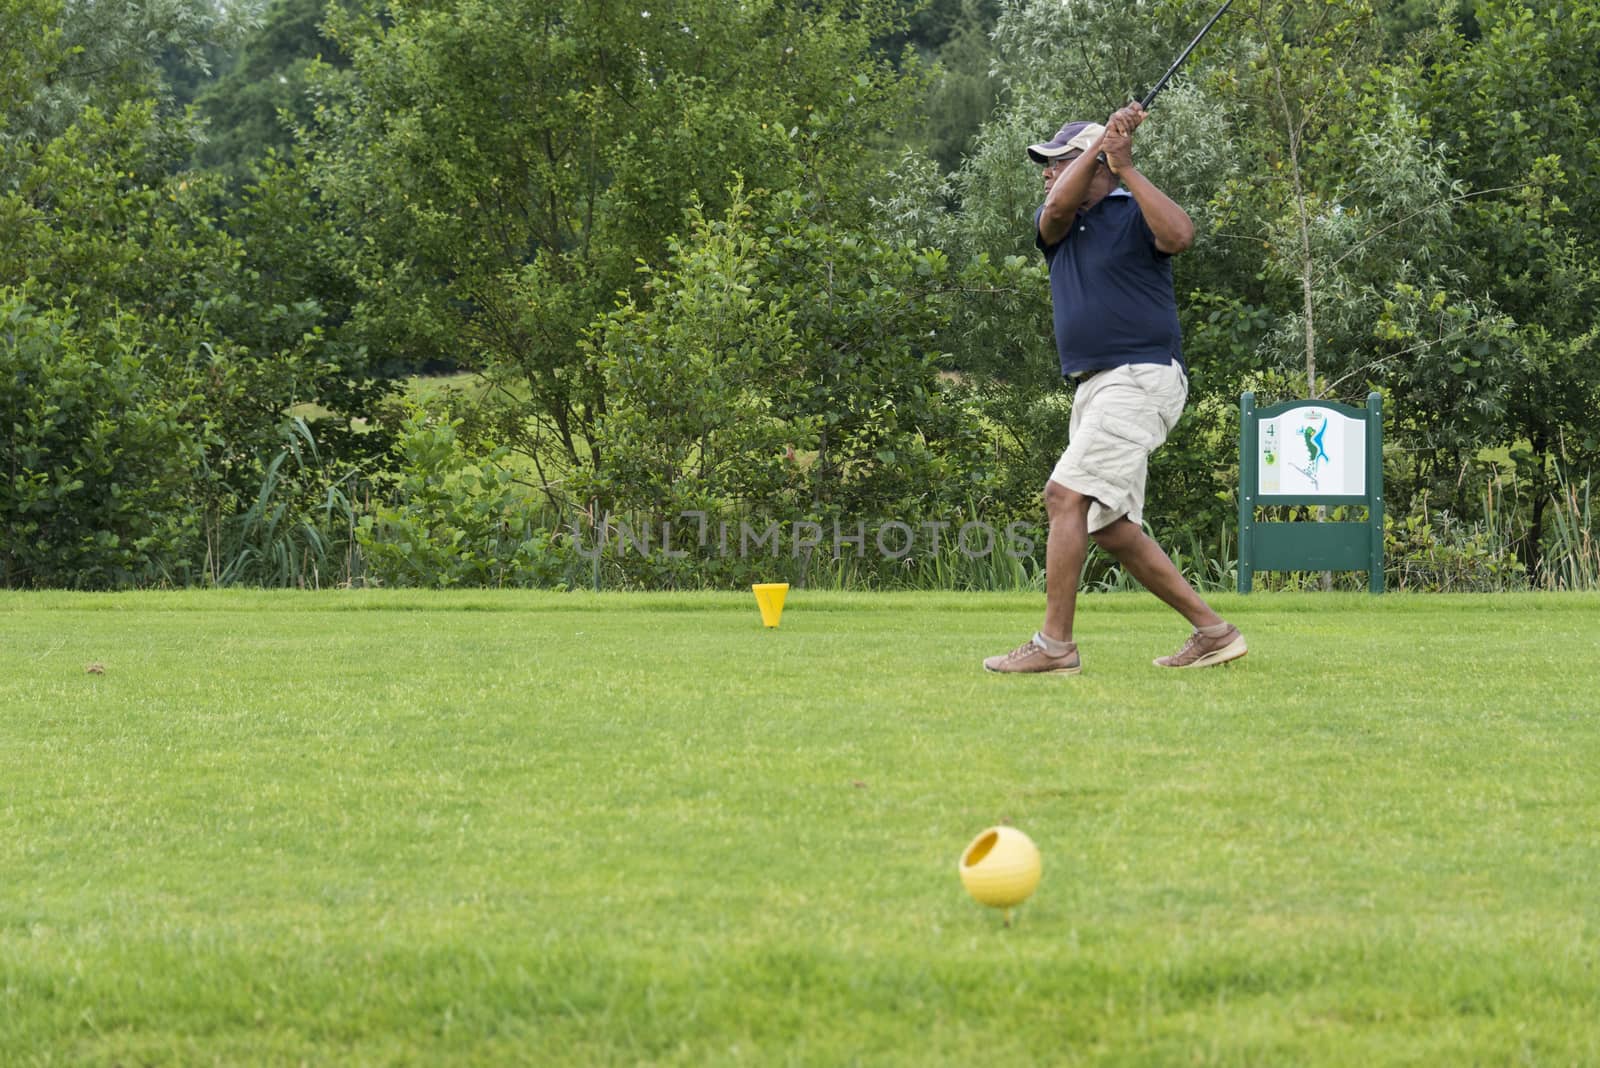 man playing golf on golftrack by compuinfoto